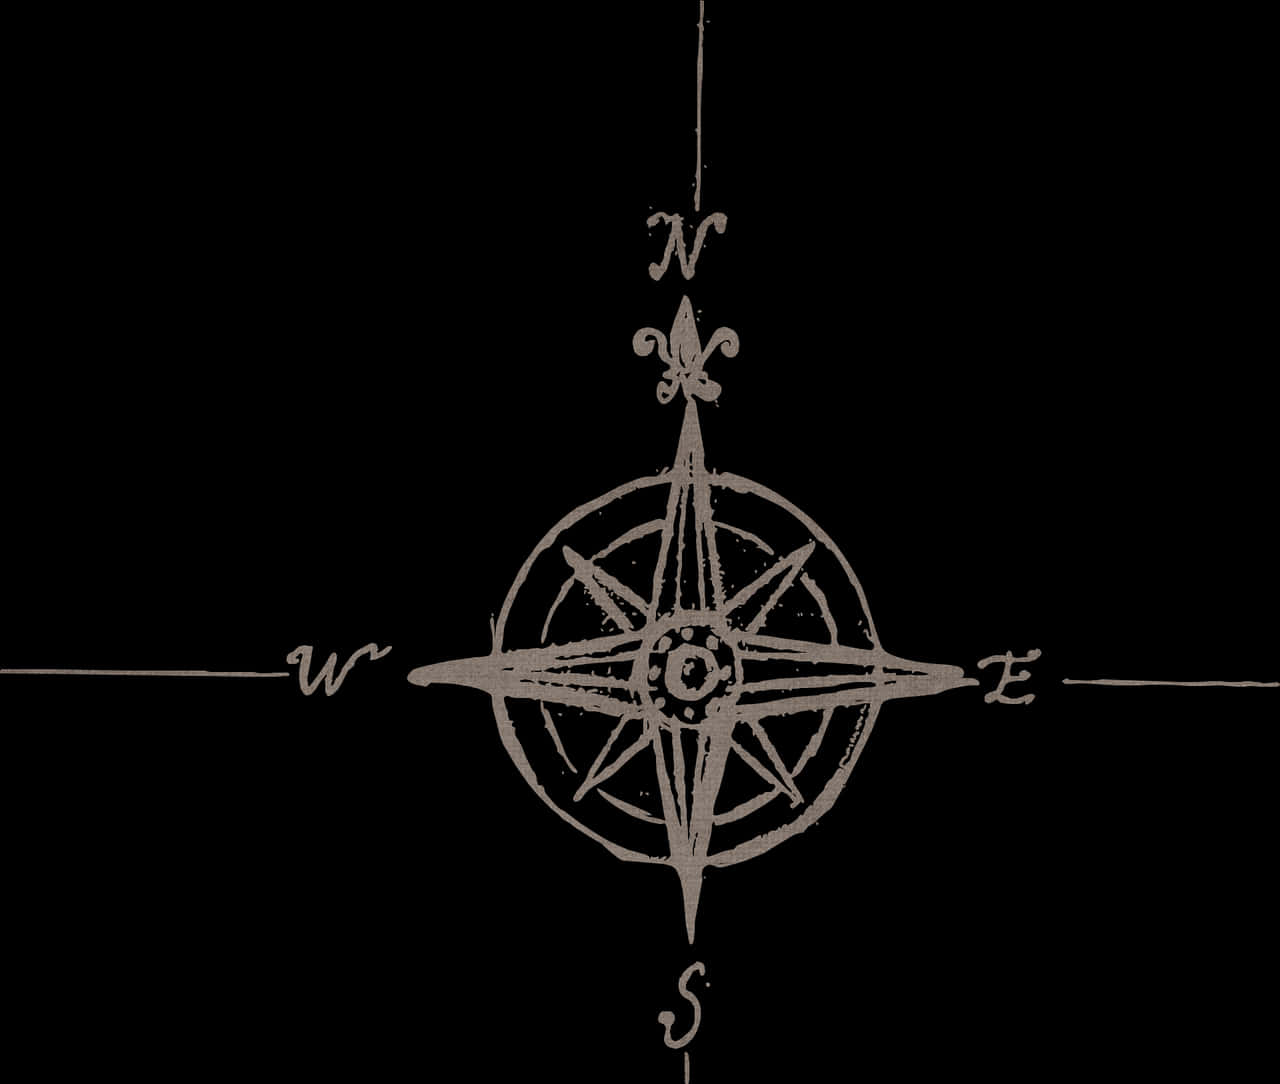 Vintage Compass Rose Graphic PNG